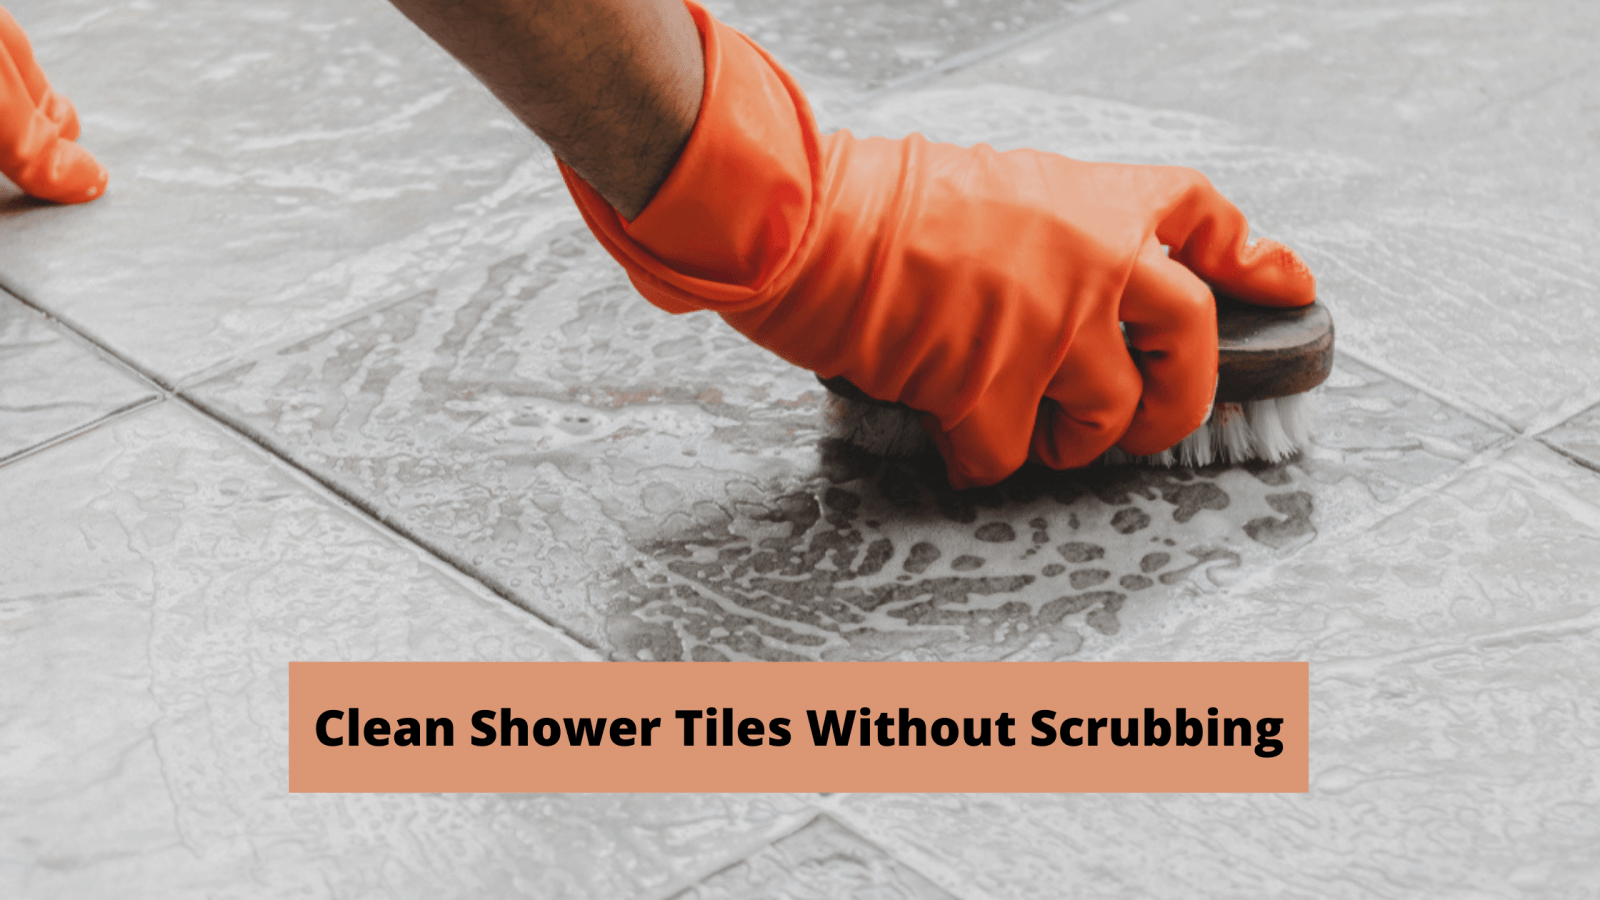 How to Clean Textured Tile Flooring the Easy Way: With Steam!